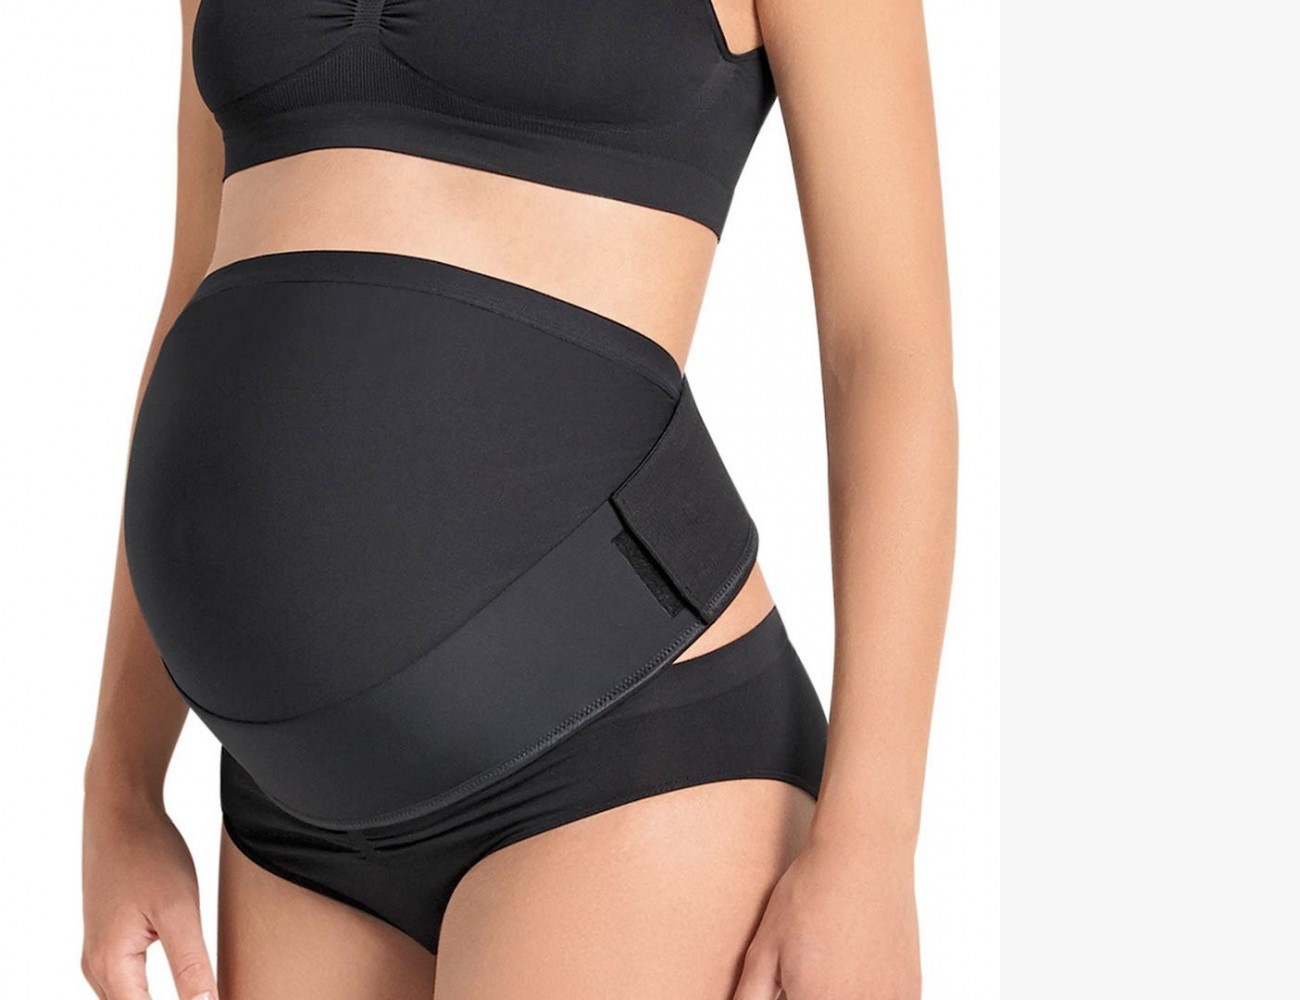 Pregnancy girdles: when to use and how to choose? - Loja Ortopédica